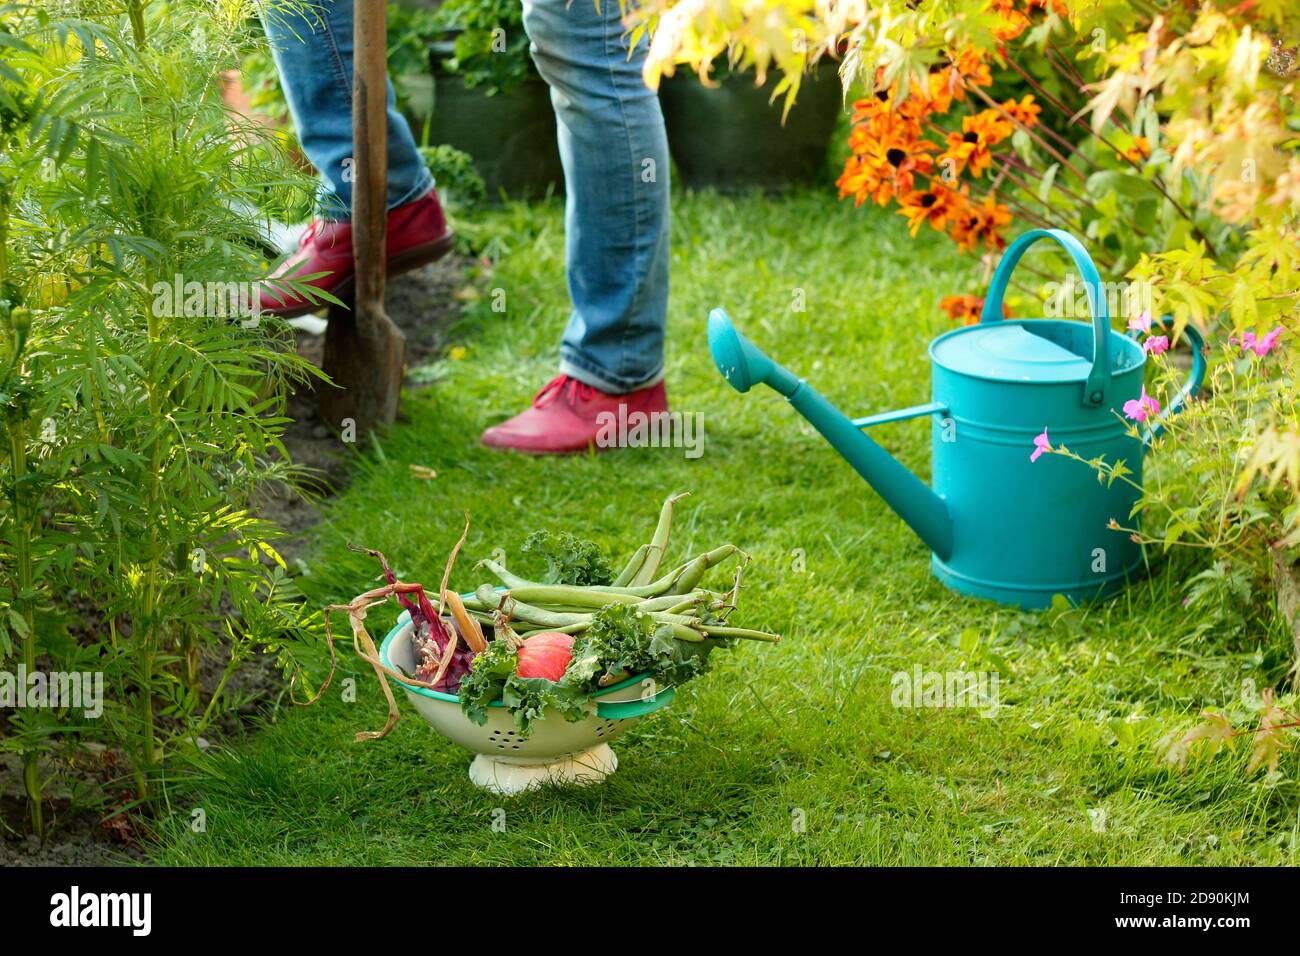 Woman harvesting vegetables grown in the domestic kitchen garden pictured in late summer. UK Stock Photo